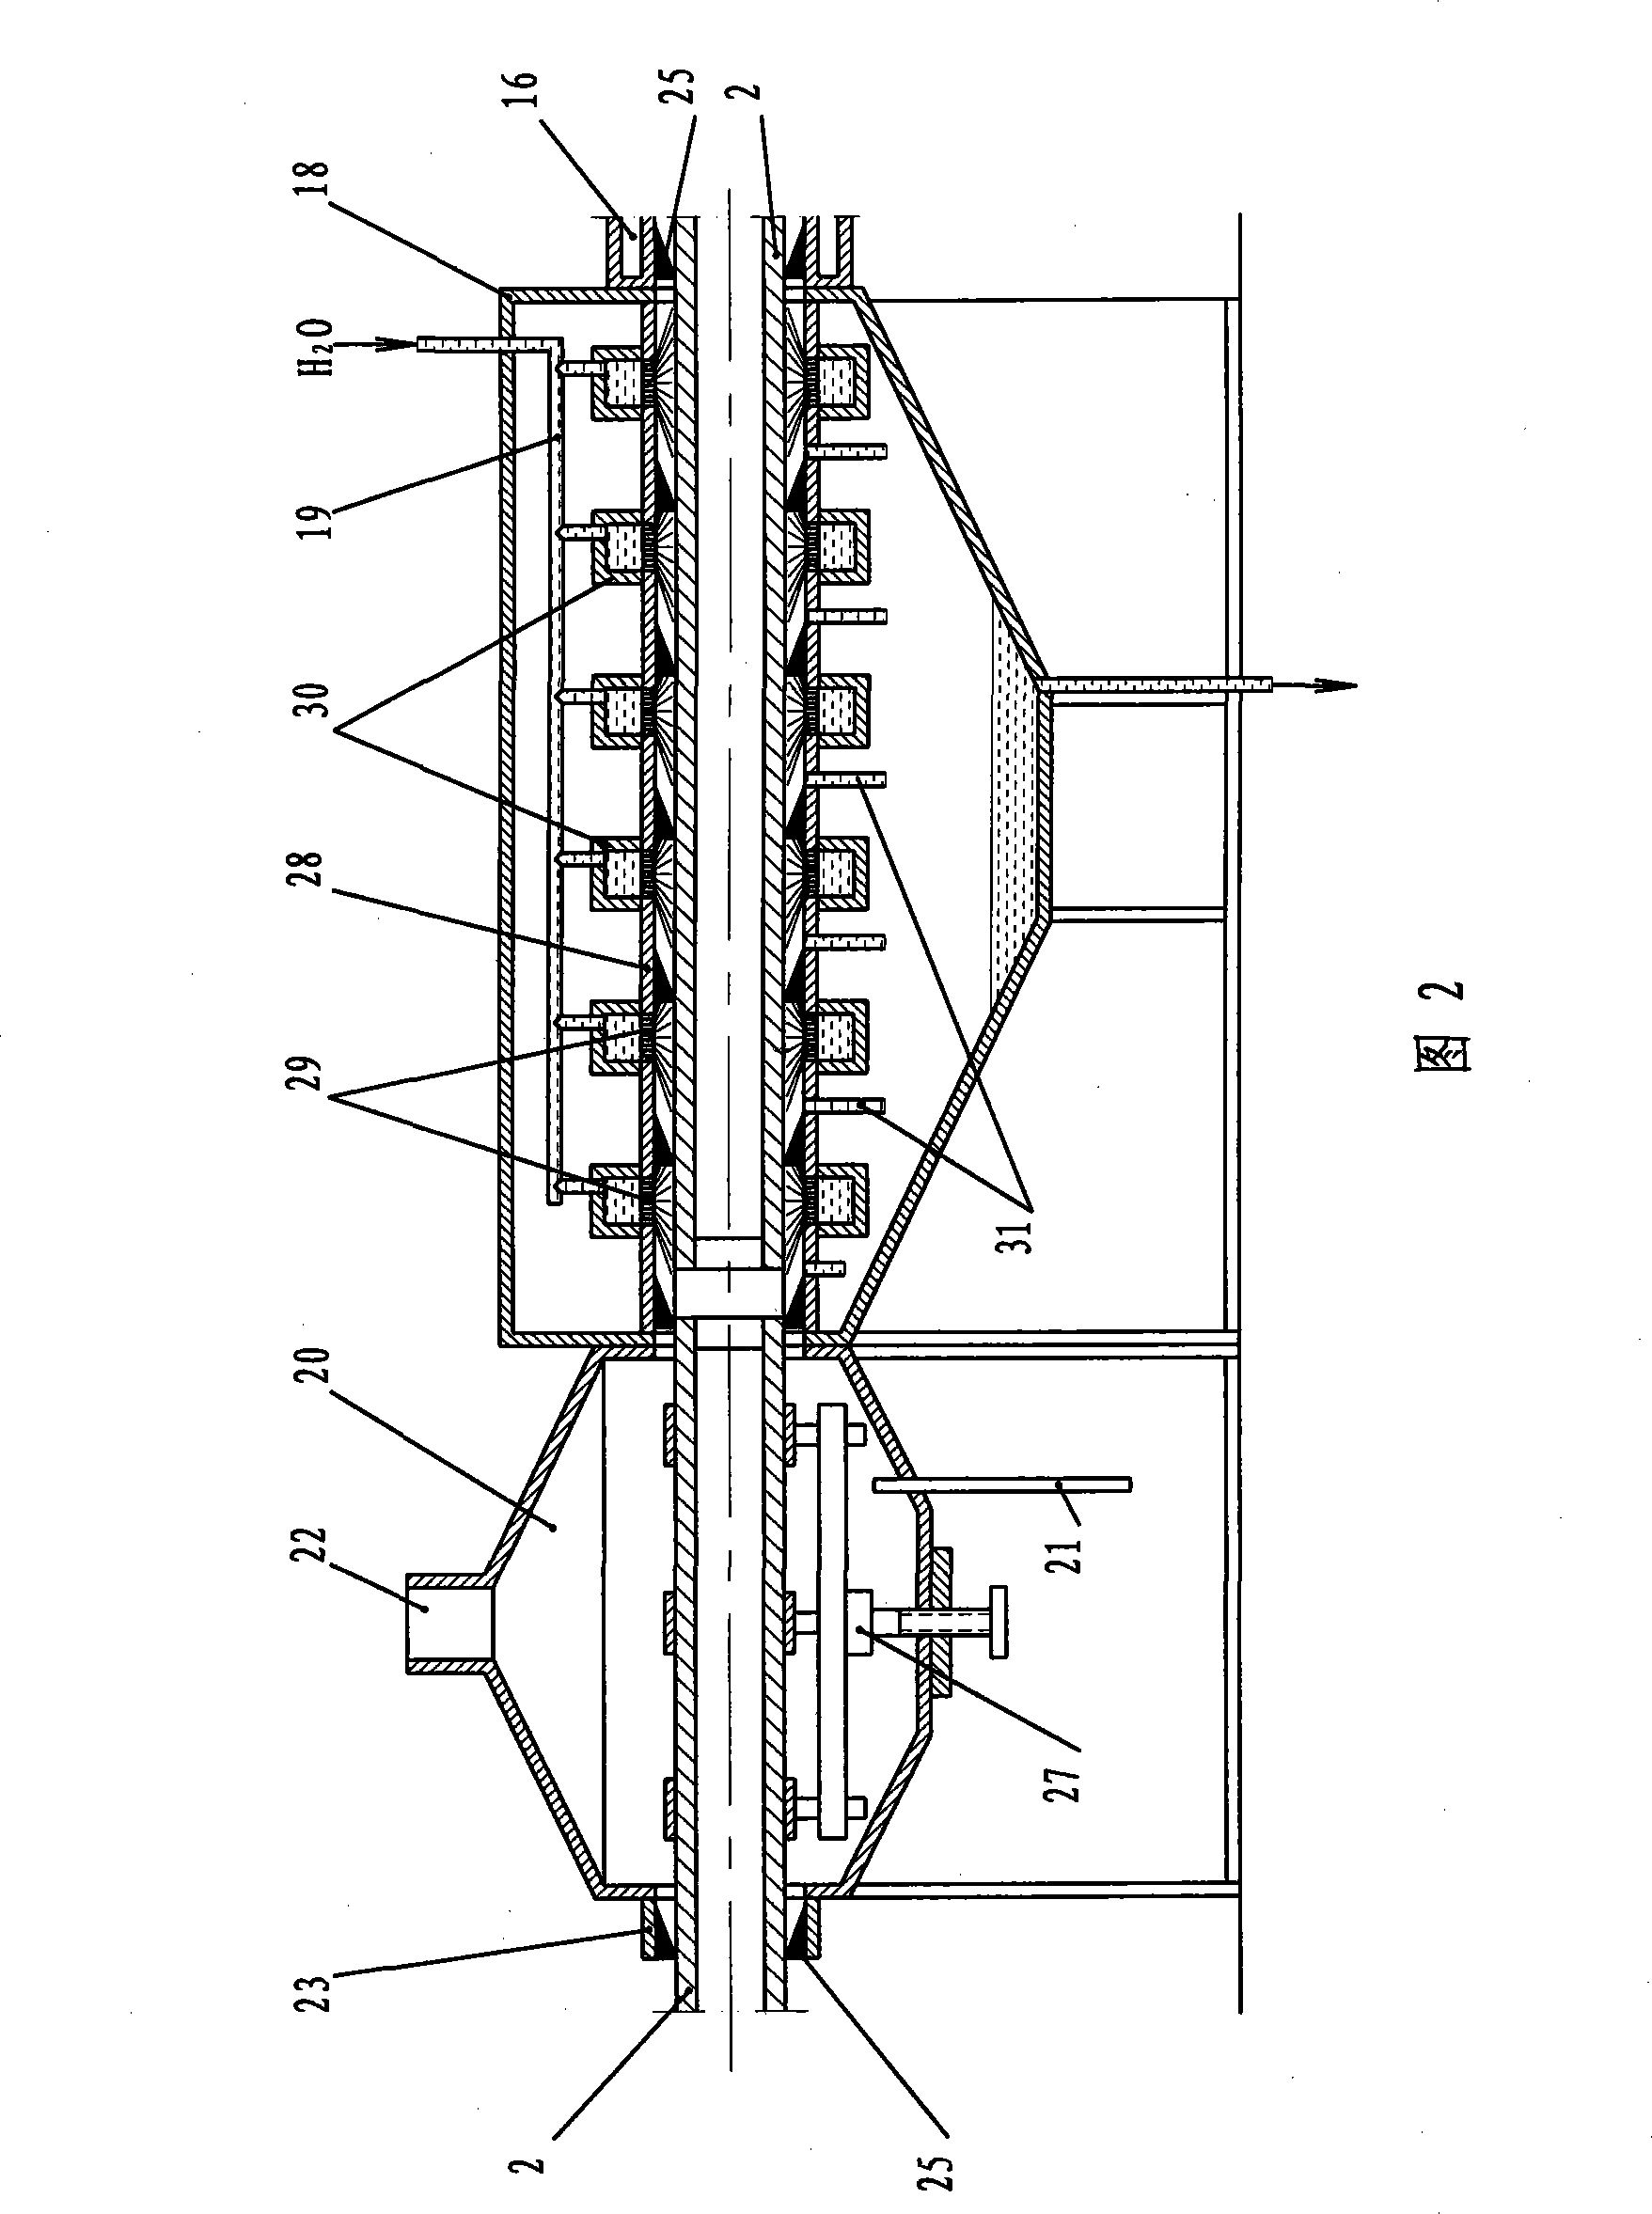 On-line annealing method and apparatus for rolling copper pipe